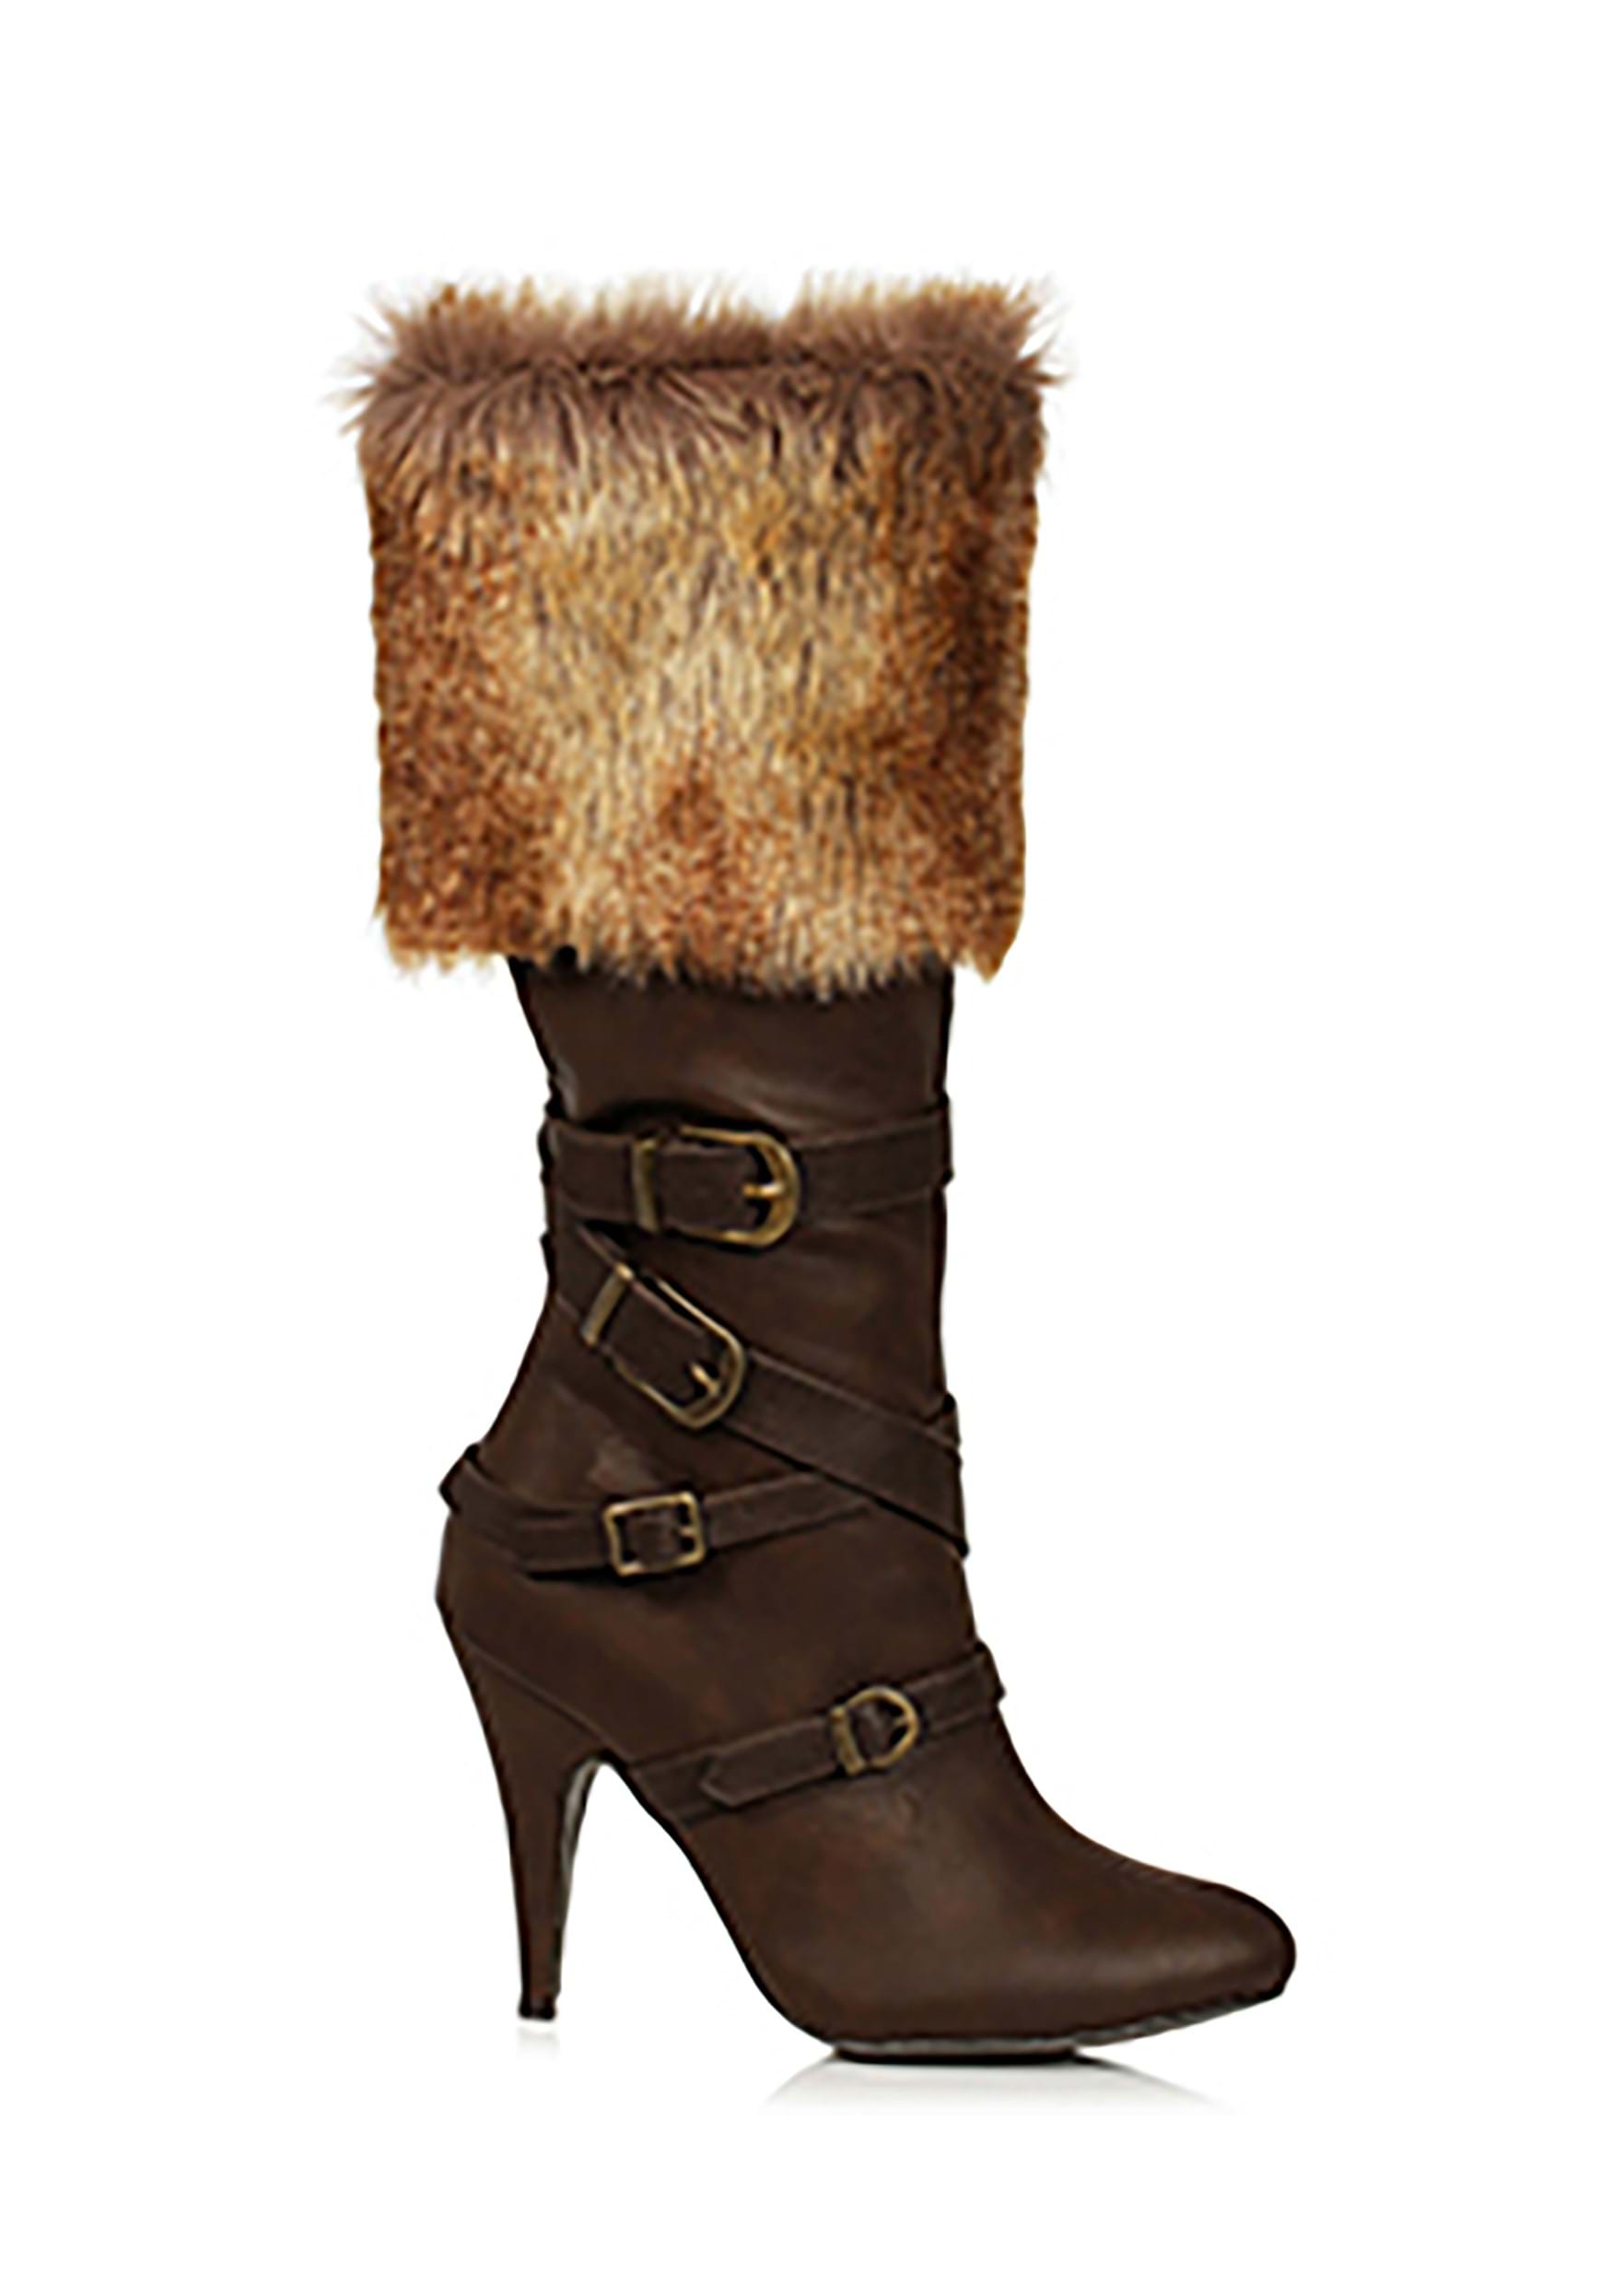 Image of Fur Trimmed Women's Viking Boots ID EE417GRETABR-7